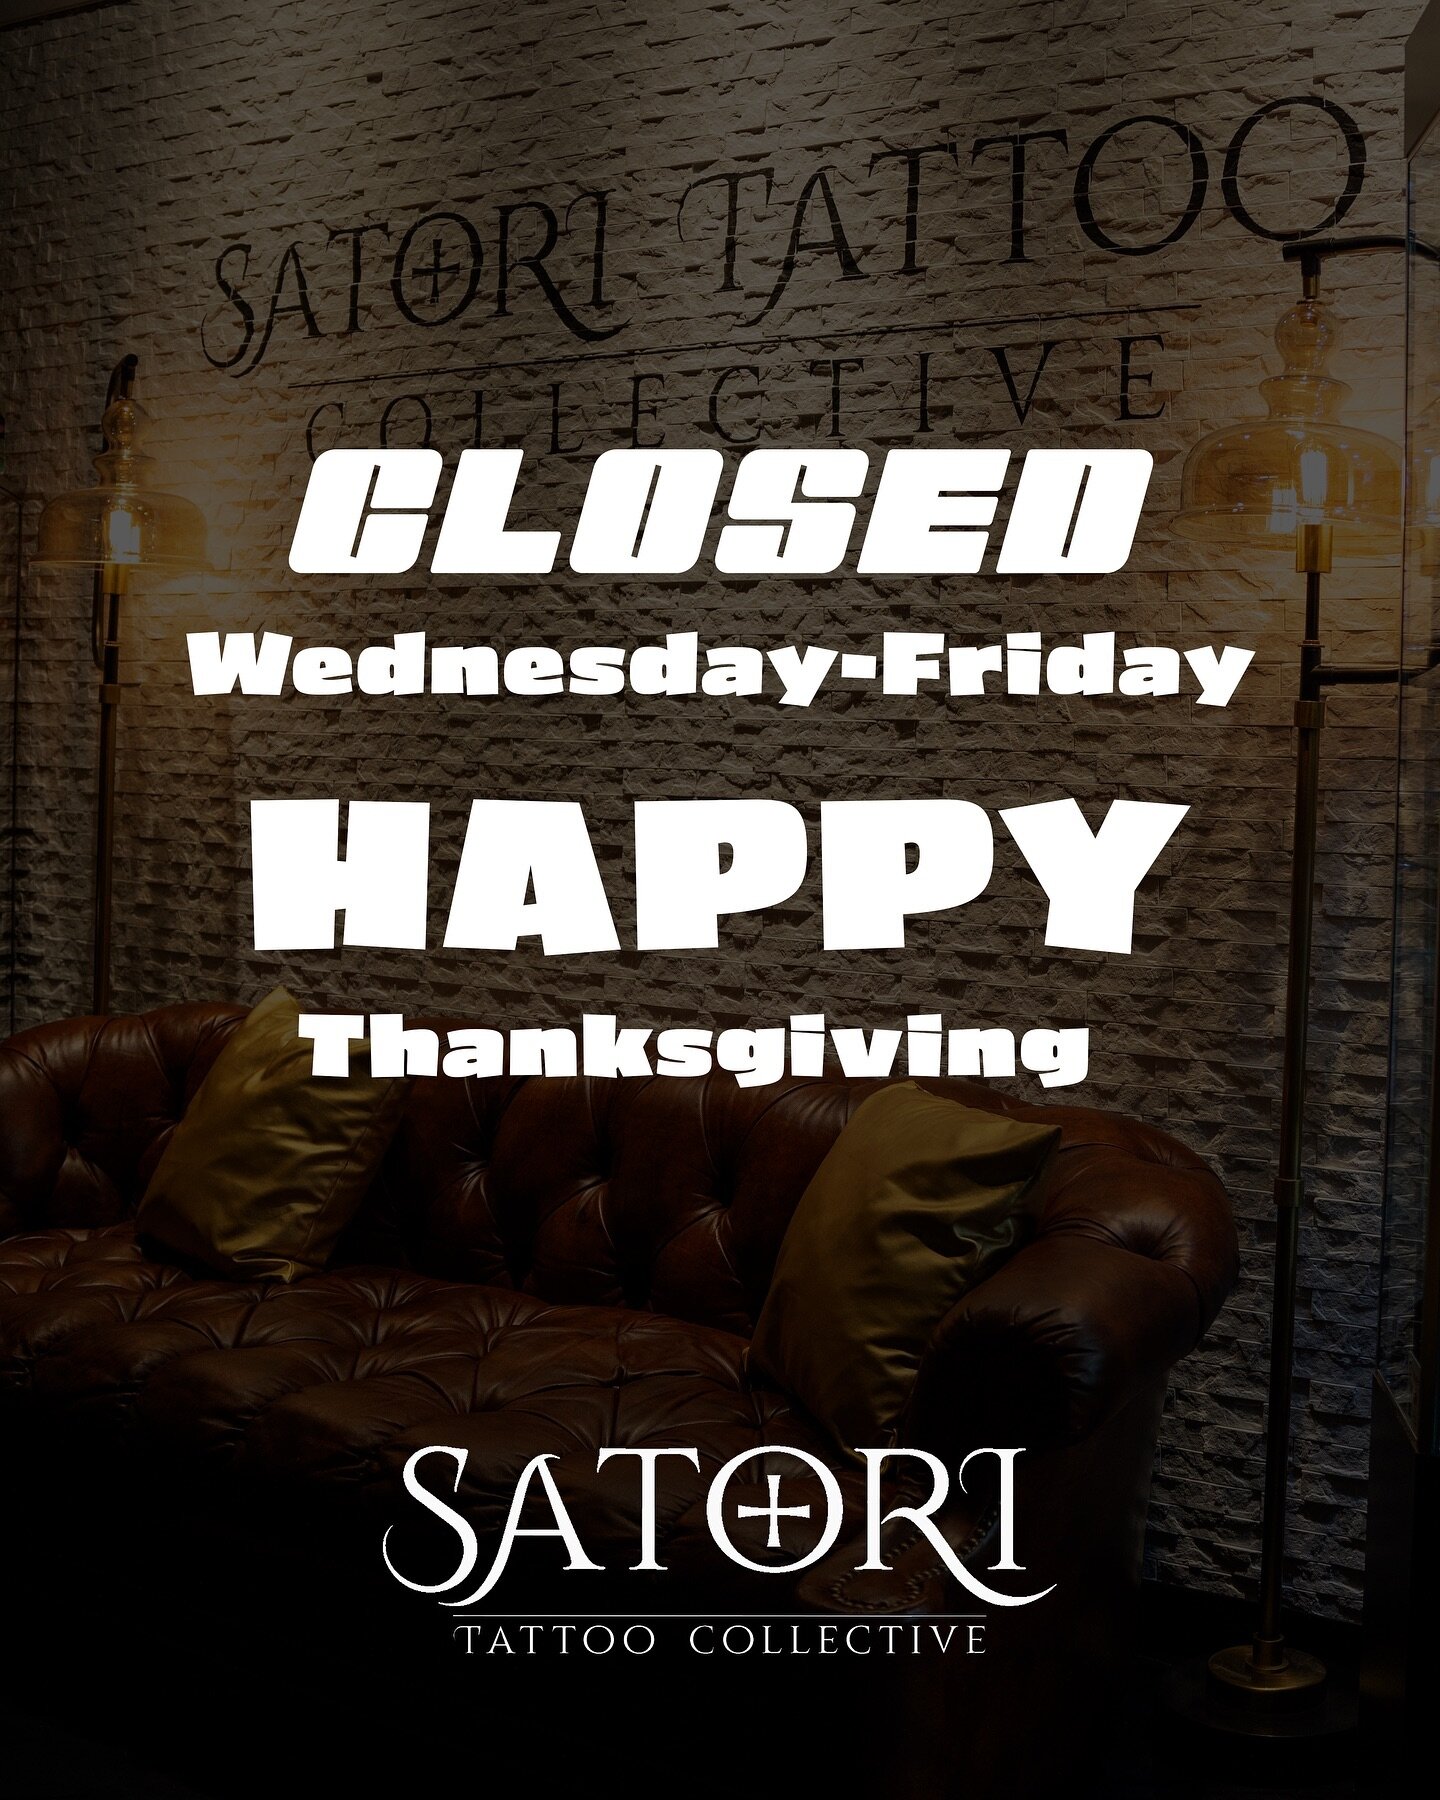 Heads up! 🚨

We&rsquo;ll be closed Wednesday-Friday for Thanksgiving! 🦃 

Back to regular hours on Saturday. 👍🏼